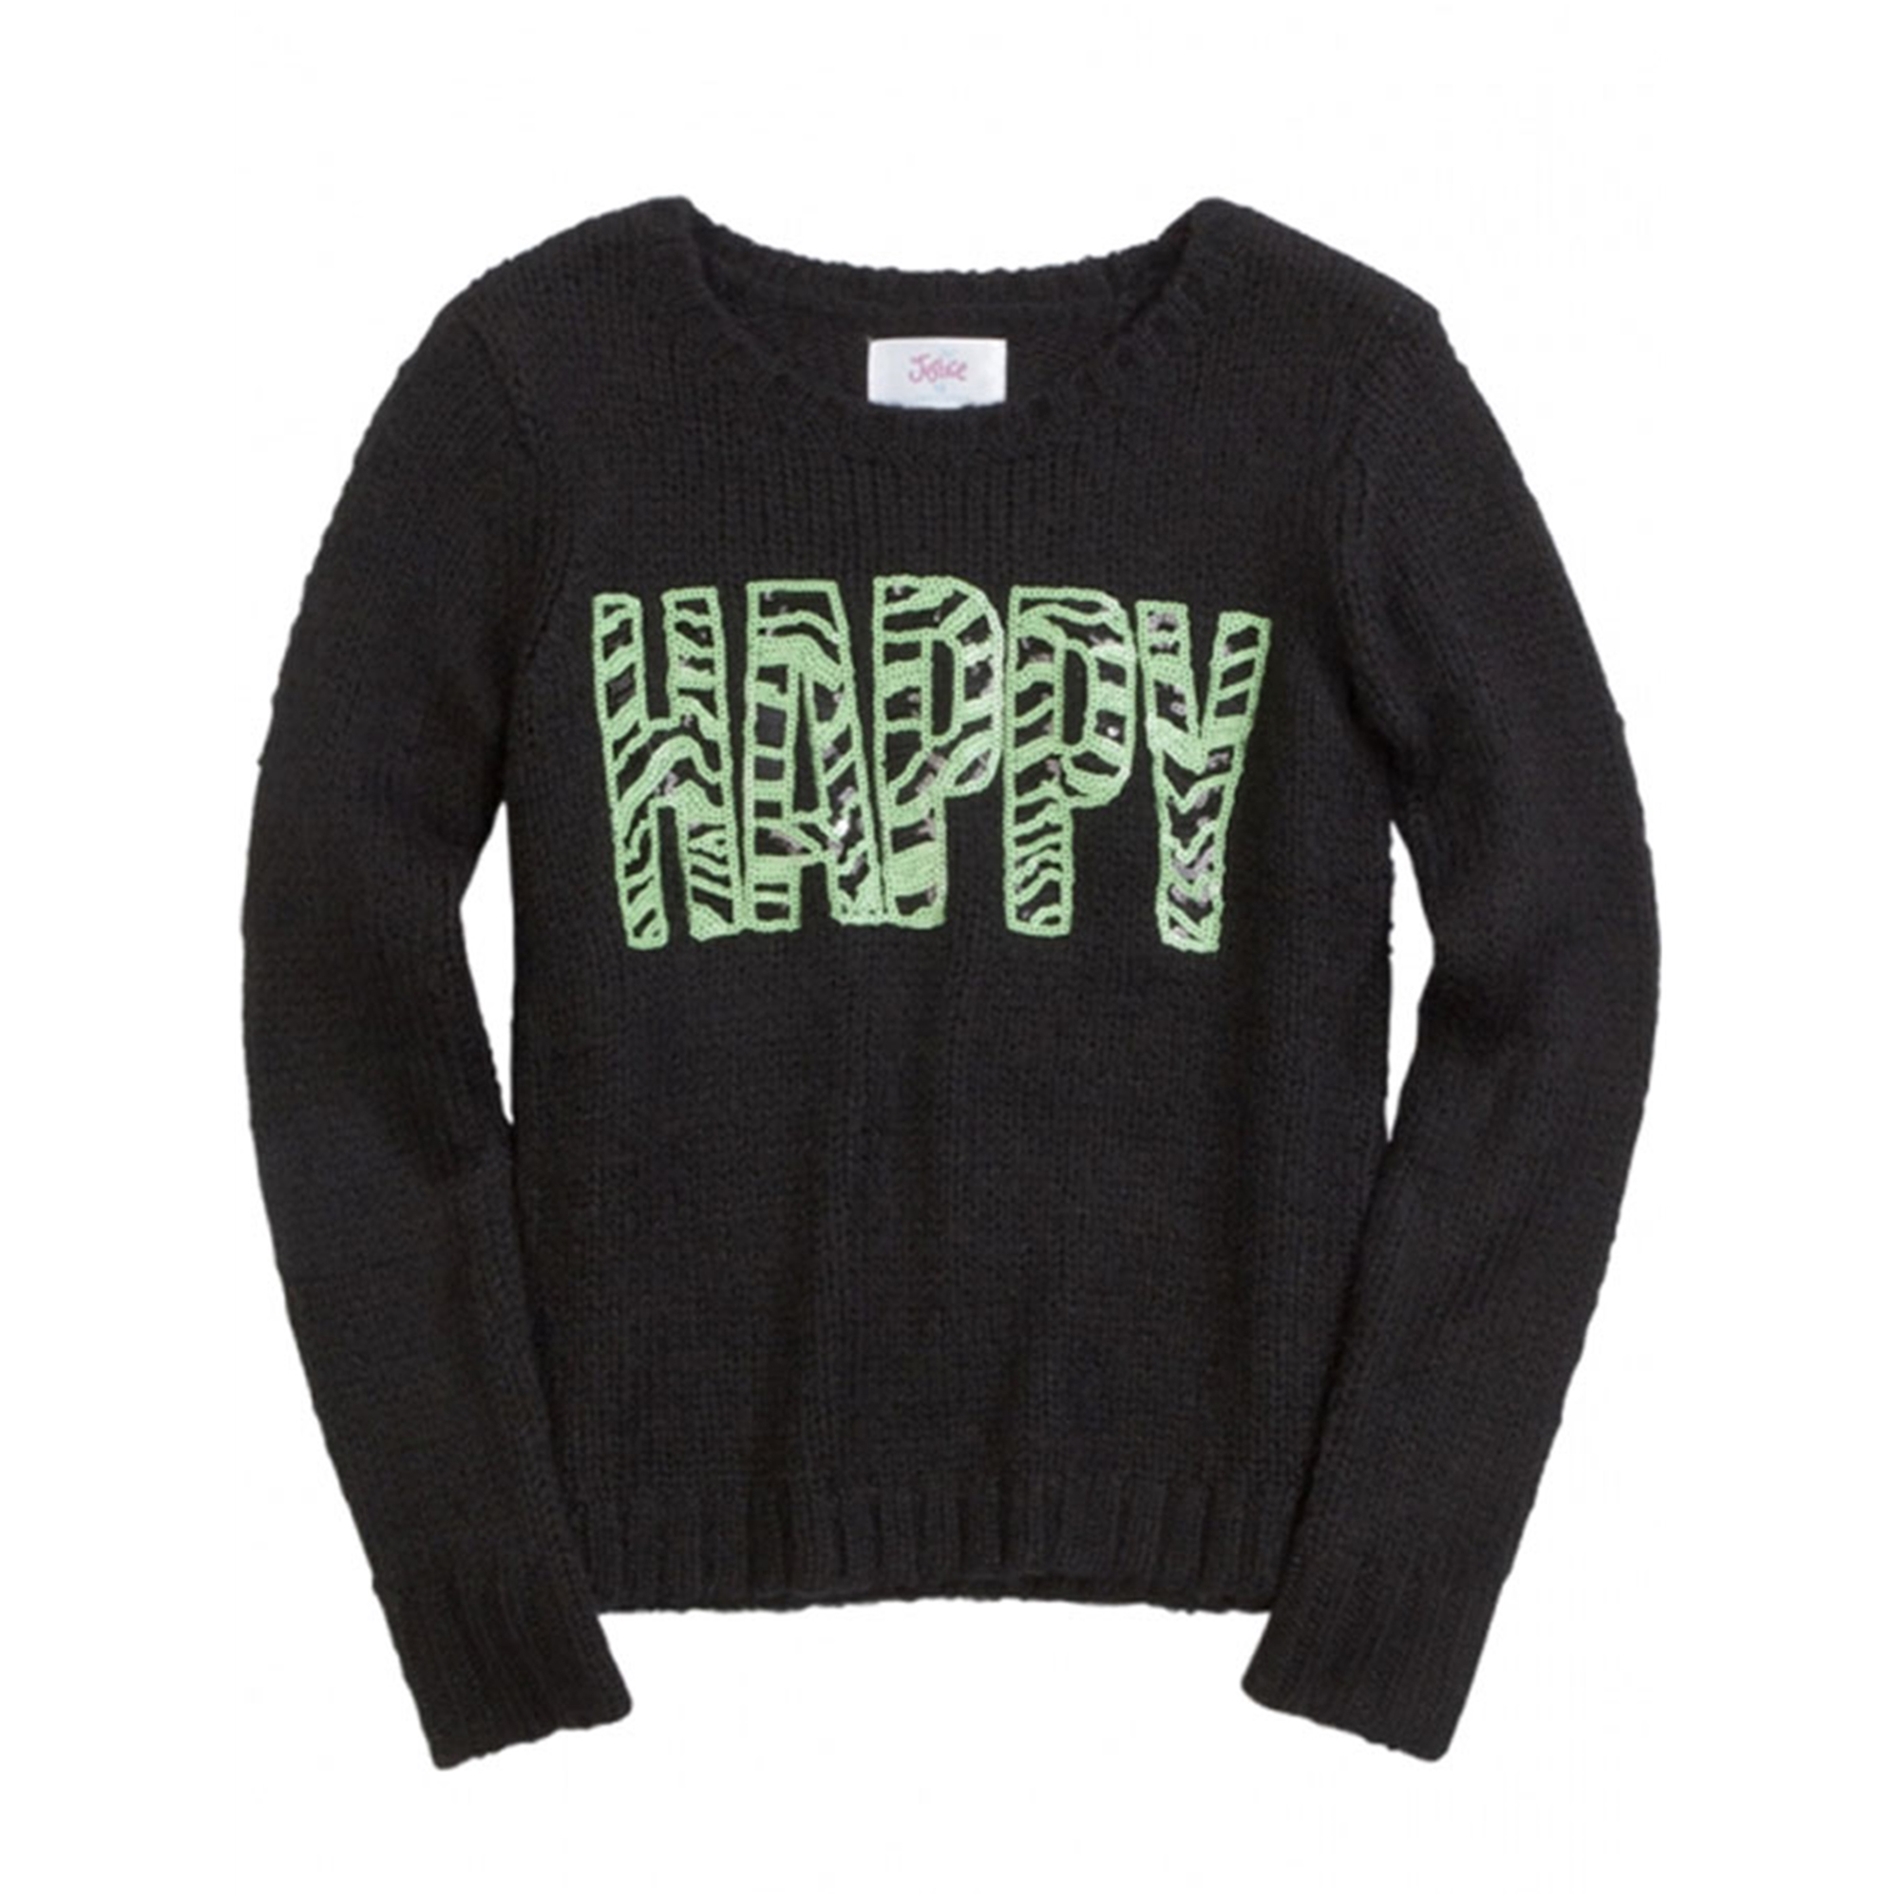 Justice Girls Happy Knit Sweater